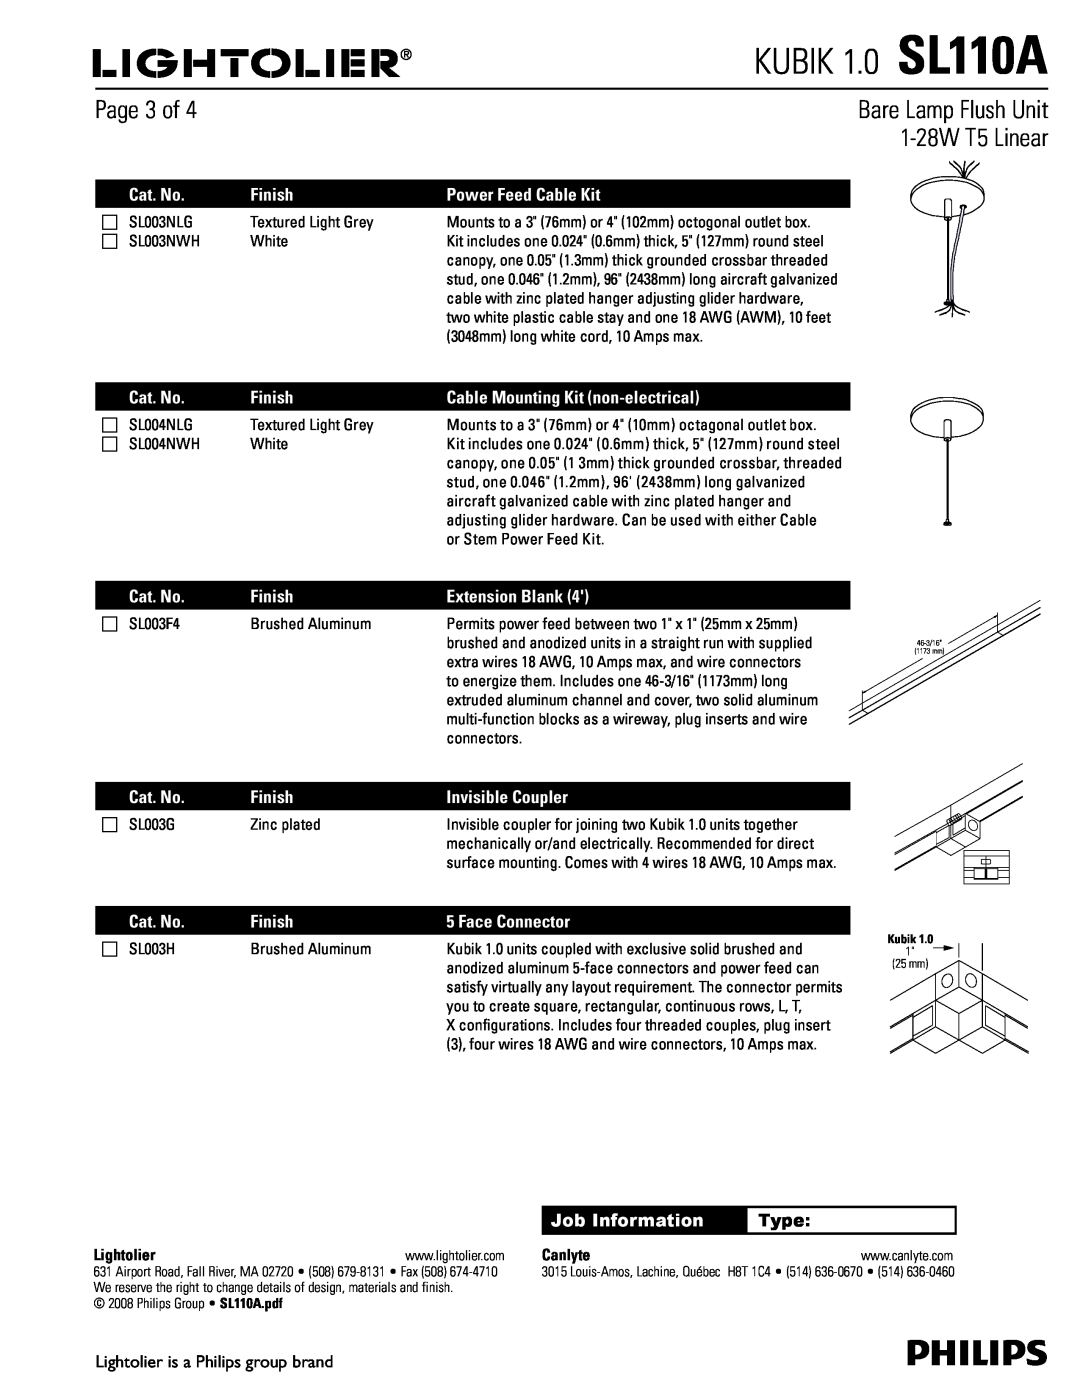 Philips dimensions Page 3 of, KUBIK 1.0 SL110A, Bare Lamp Flush Unit, 1-28WT5 Linear, Type 